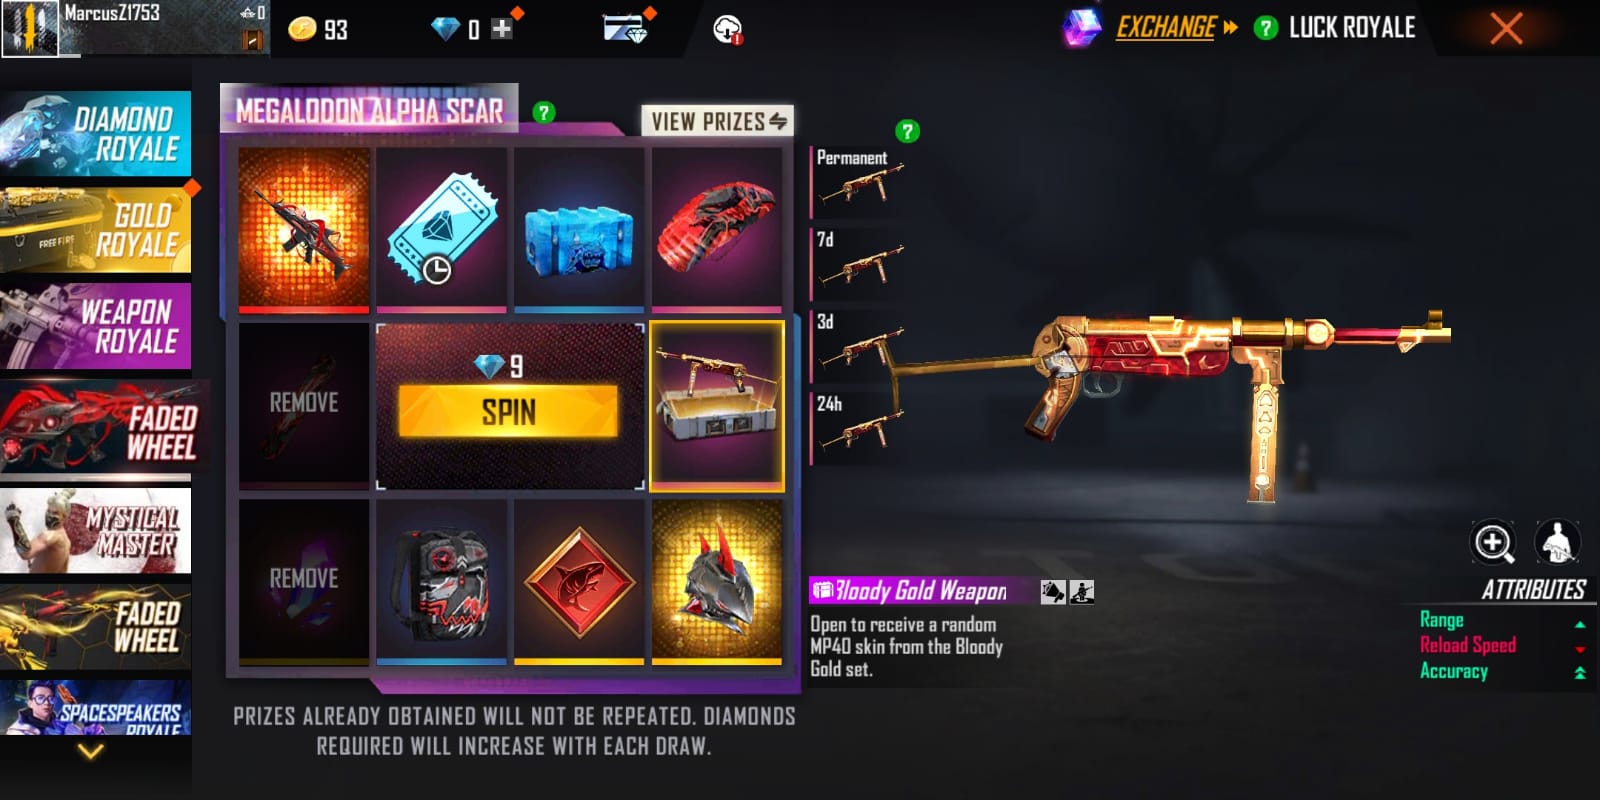 Free Fire Faded Wheel Event: Check How to get the SCAR Megalodon Alpha Evo gun, and more items from the event - All you need to know